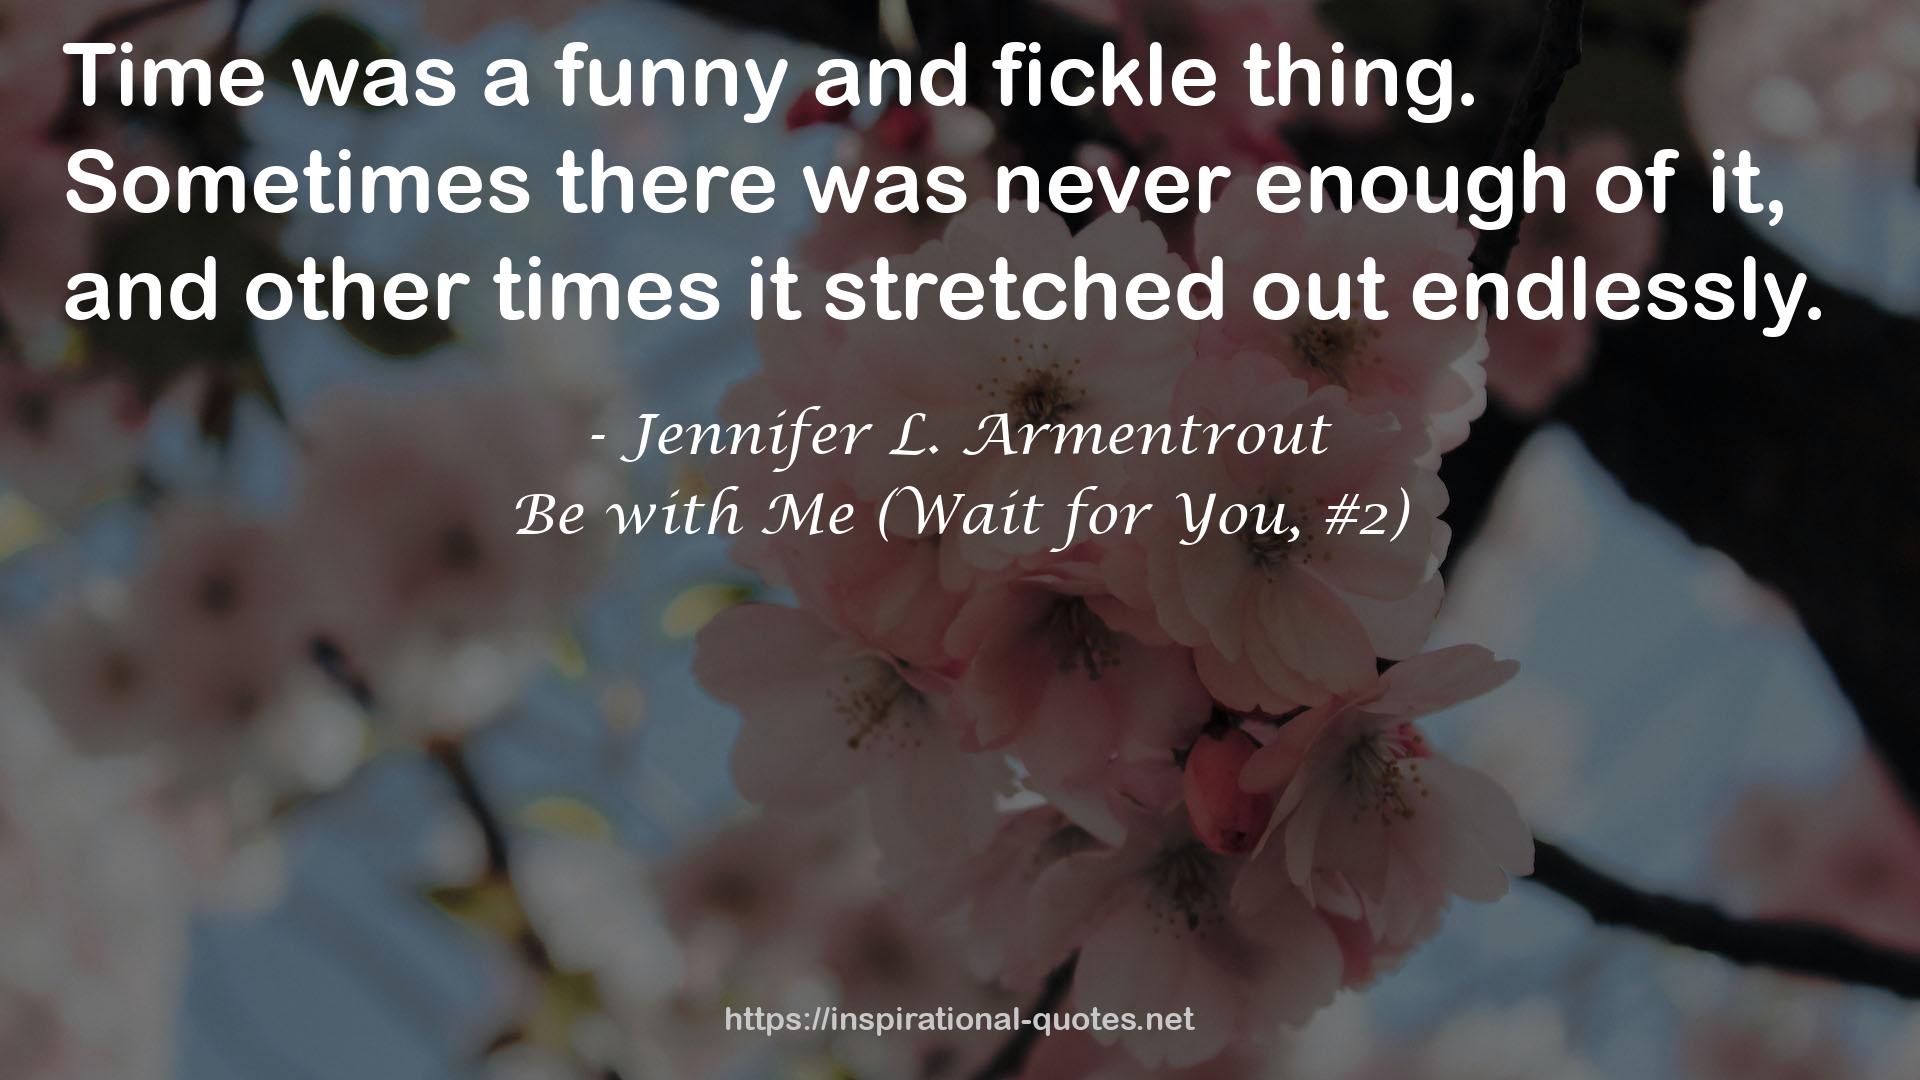 Be with Me (Wait for You, #2) QUOTES